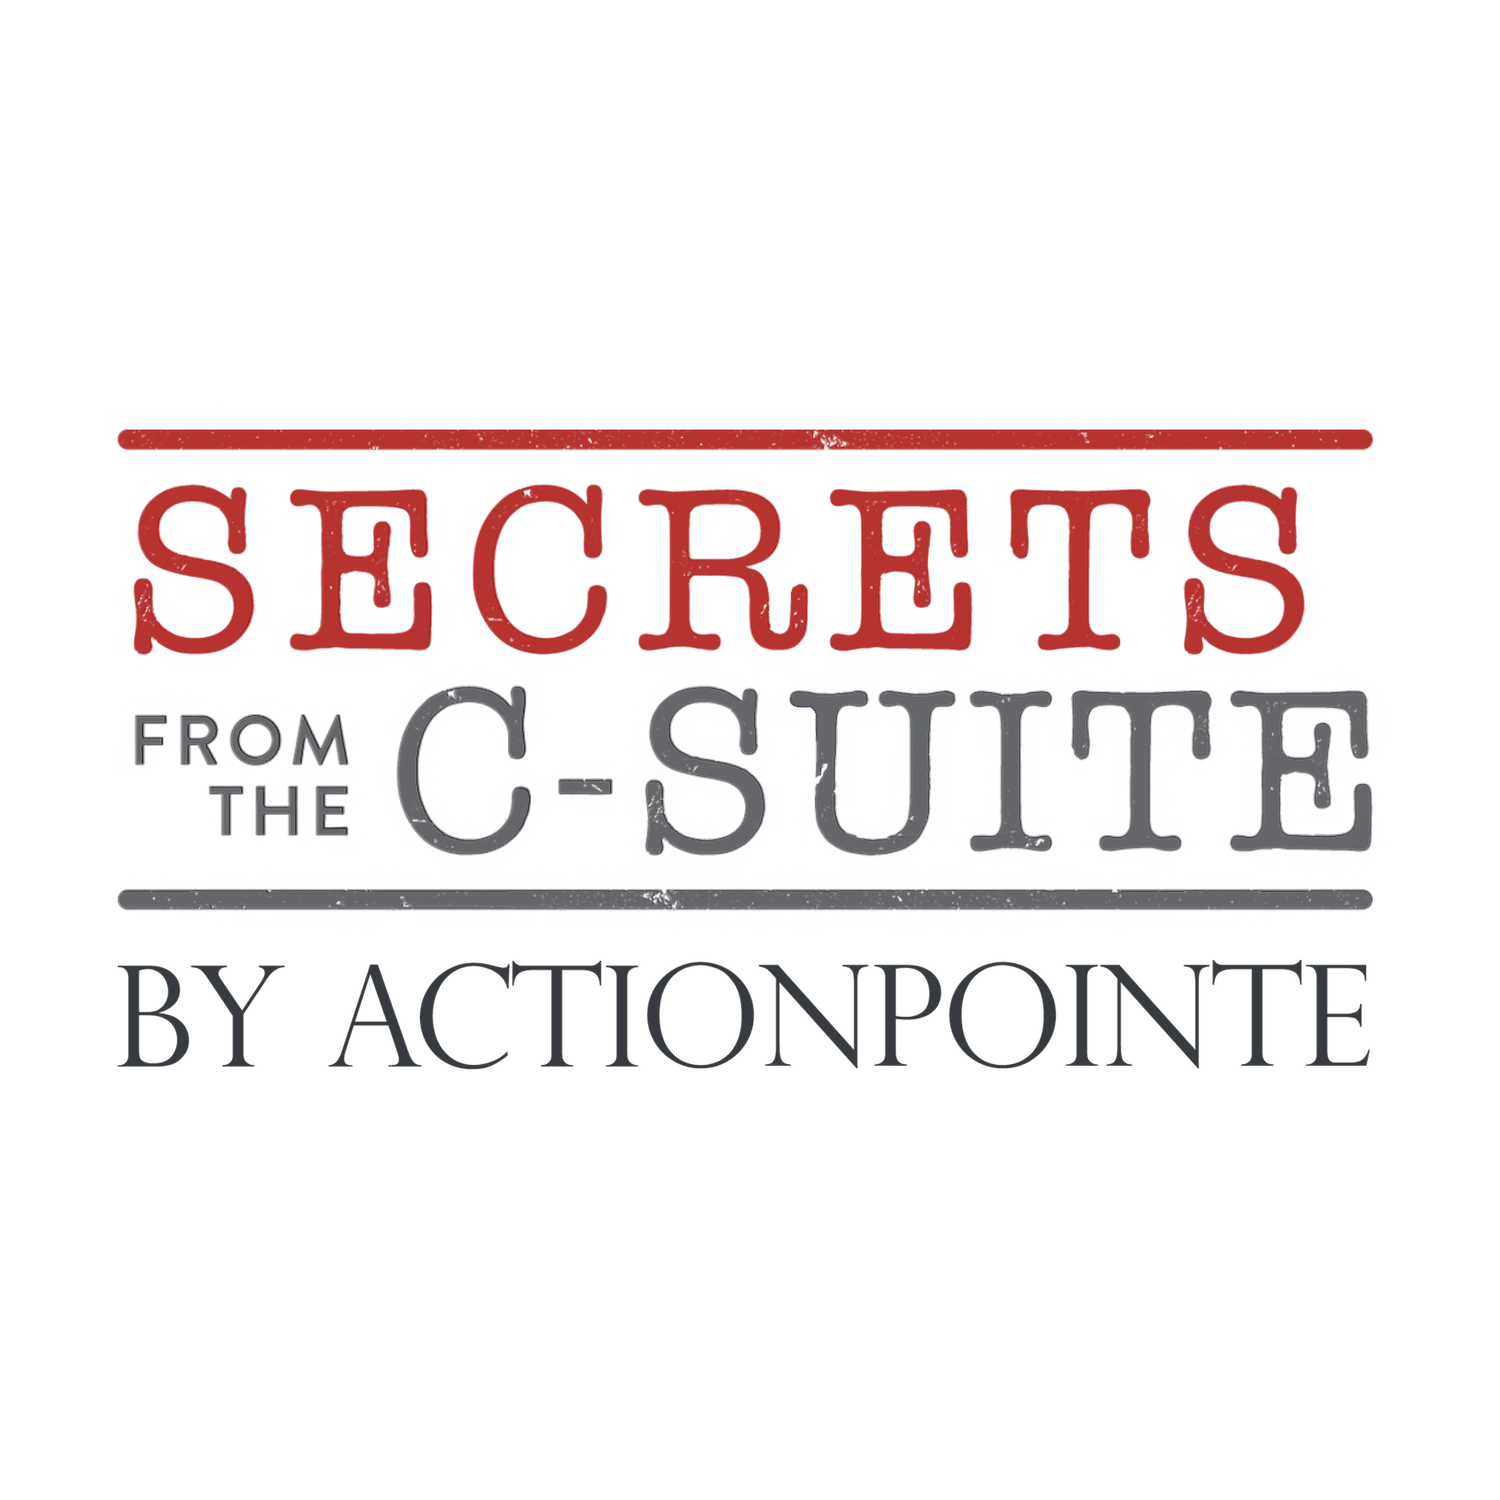 Secrets from the C-Suite